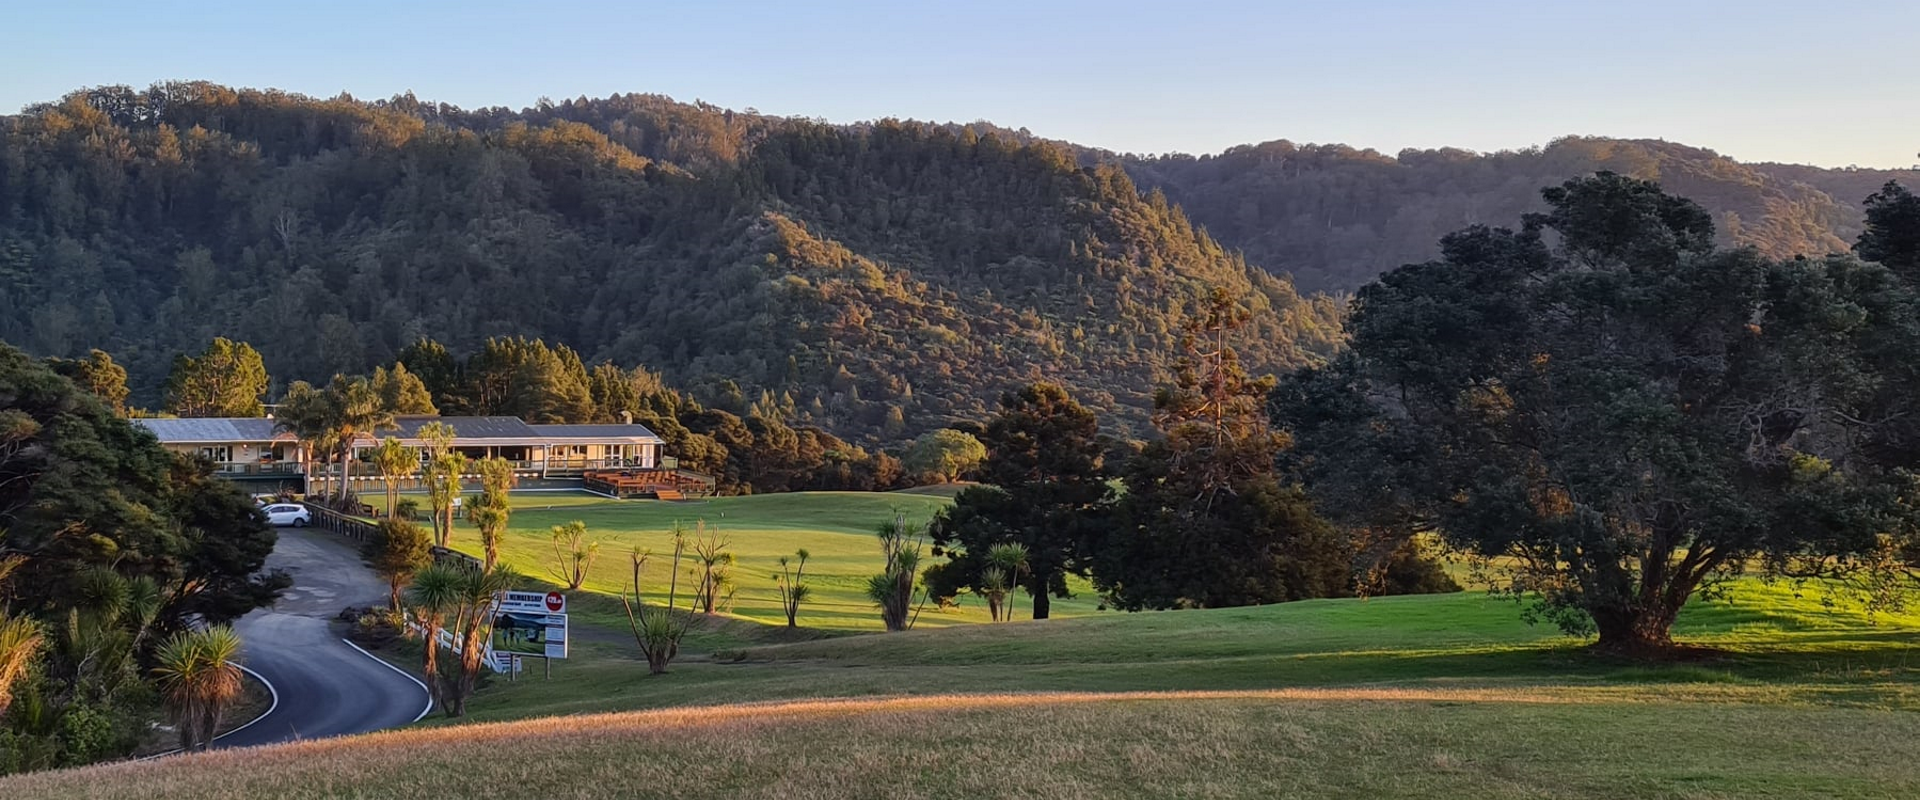 WELCOME TO THE WAITAKERE GOLF CLUB